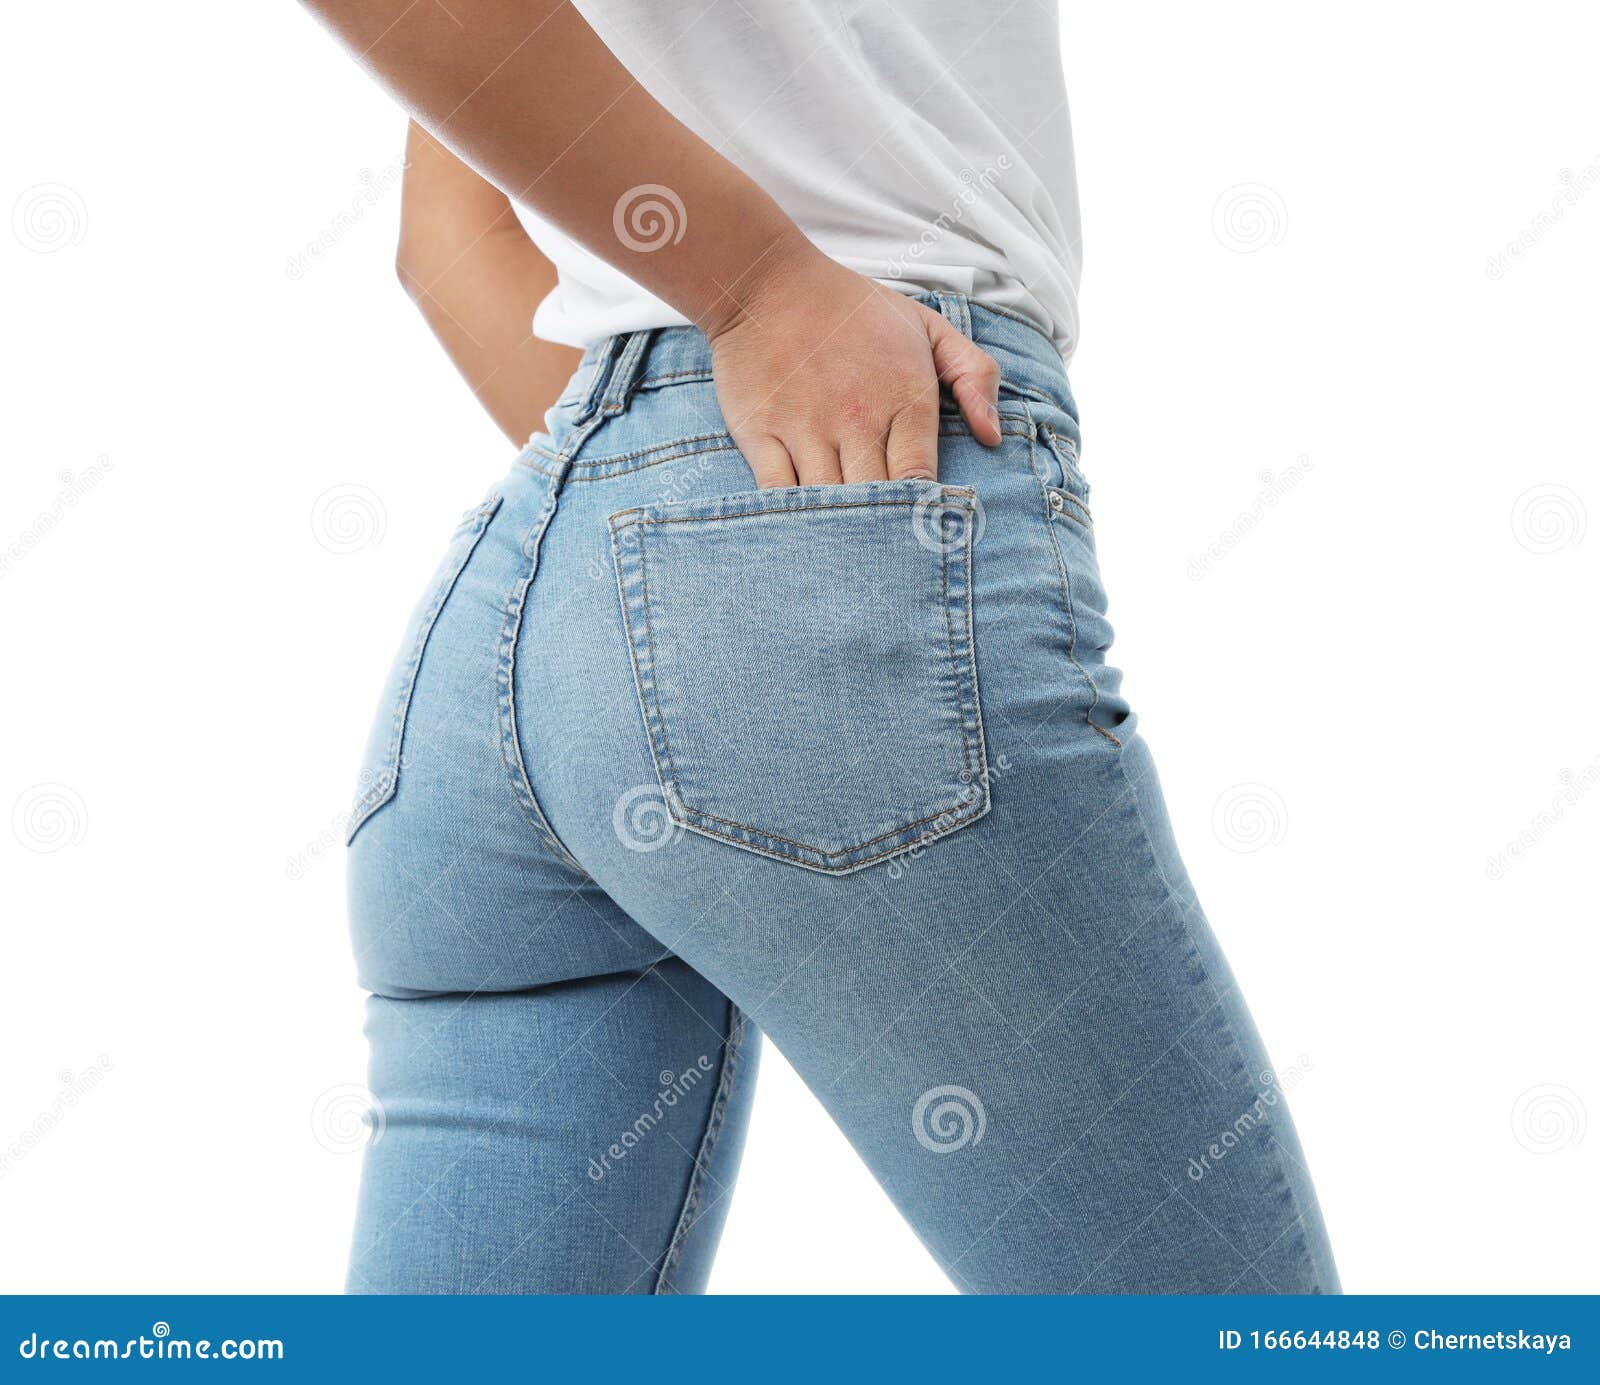 Woman Wearing Jeans on White Background Stock Photo - Image of adult ...